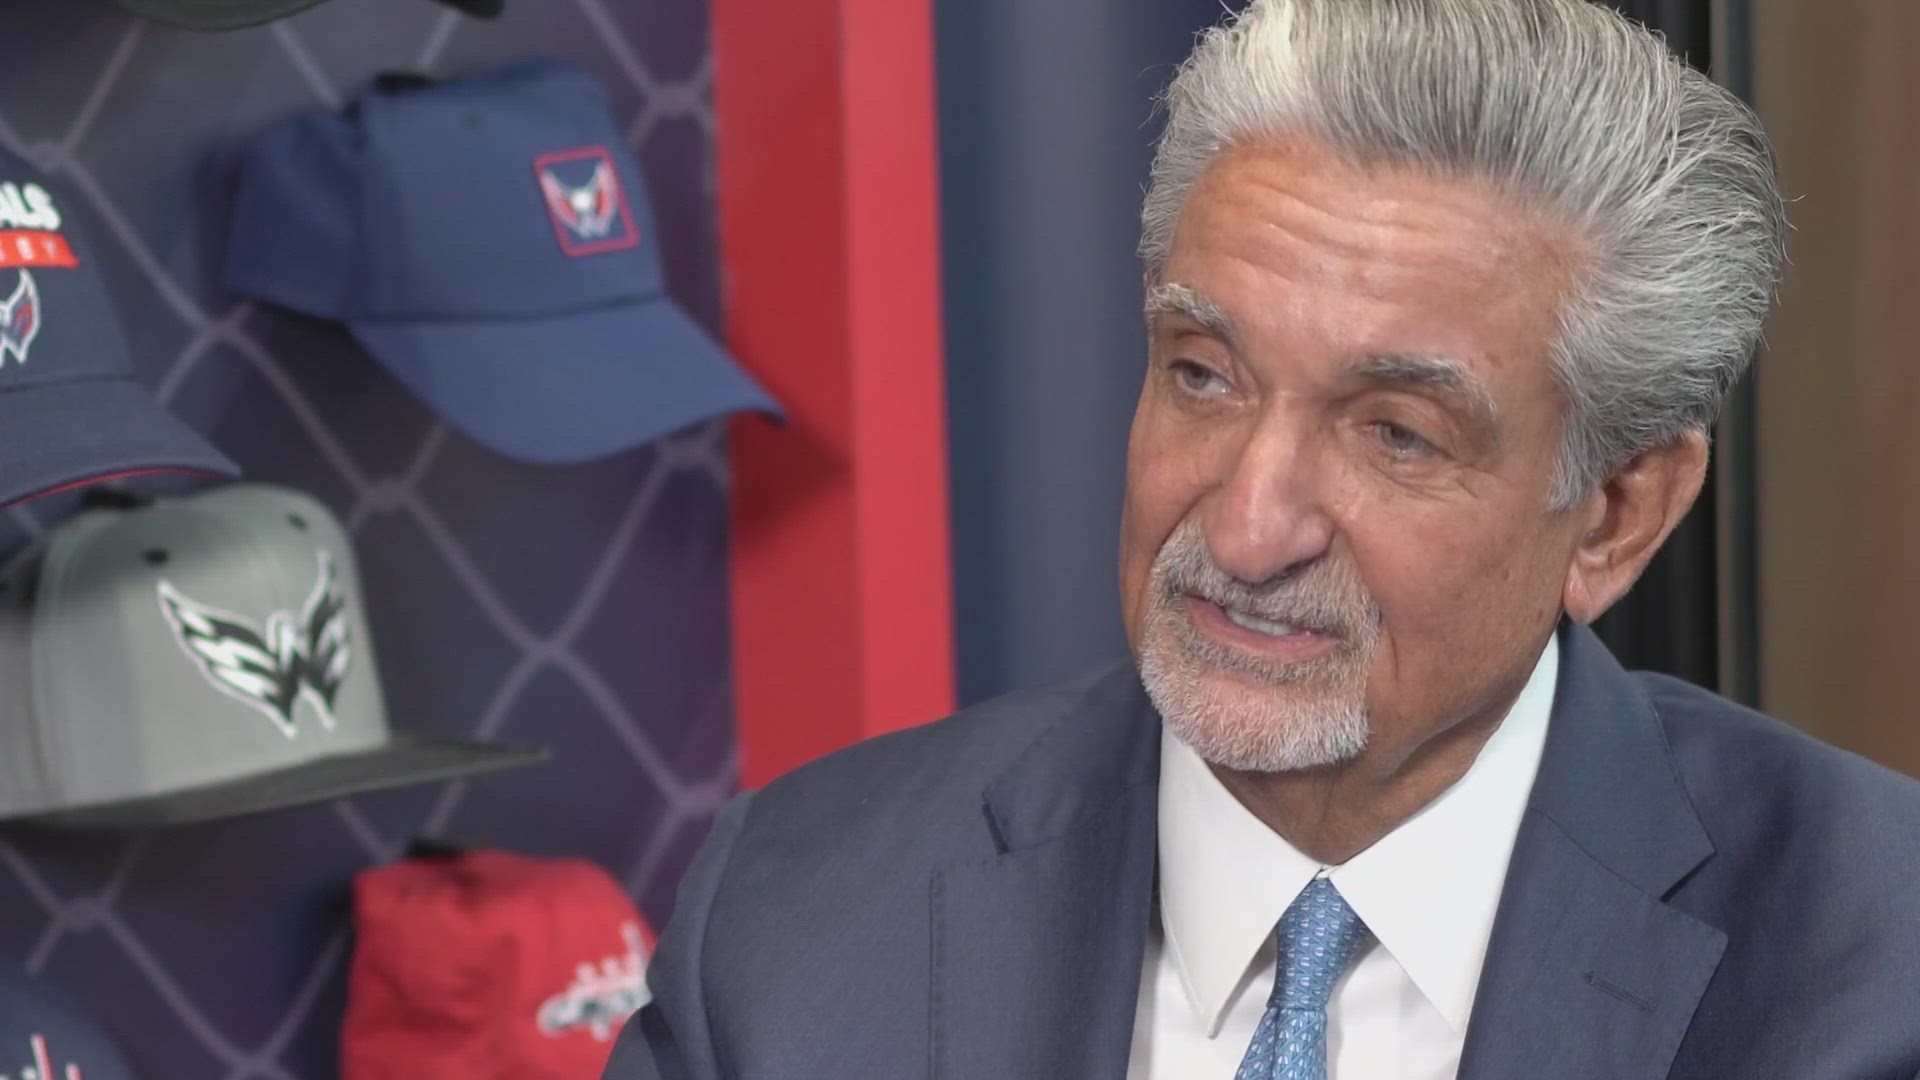 In his first public interview since announcing the move, Ted Leonsis says he can overcome traffic concerns in Potomac Yard, promises new arena will be "iconic"